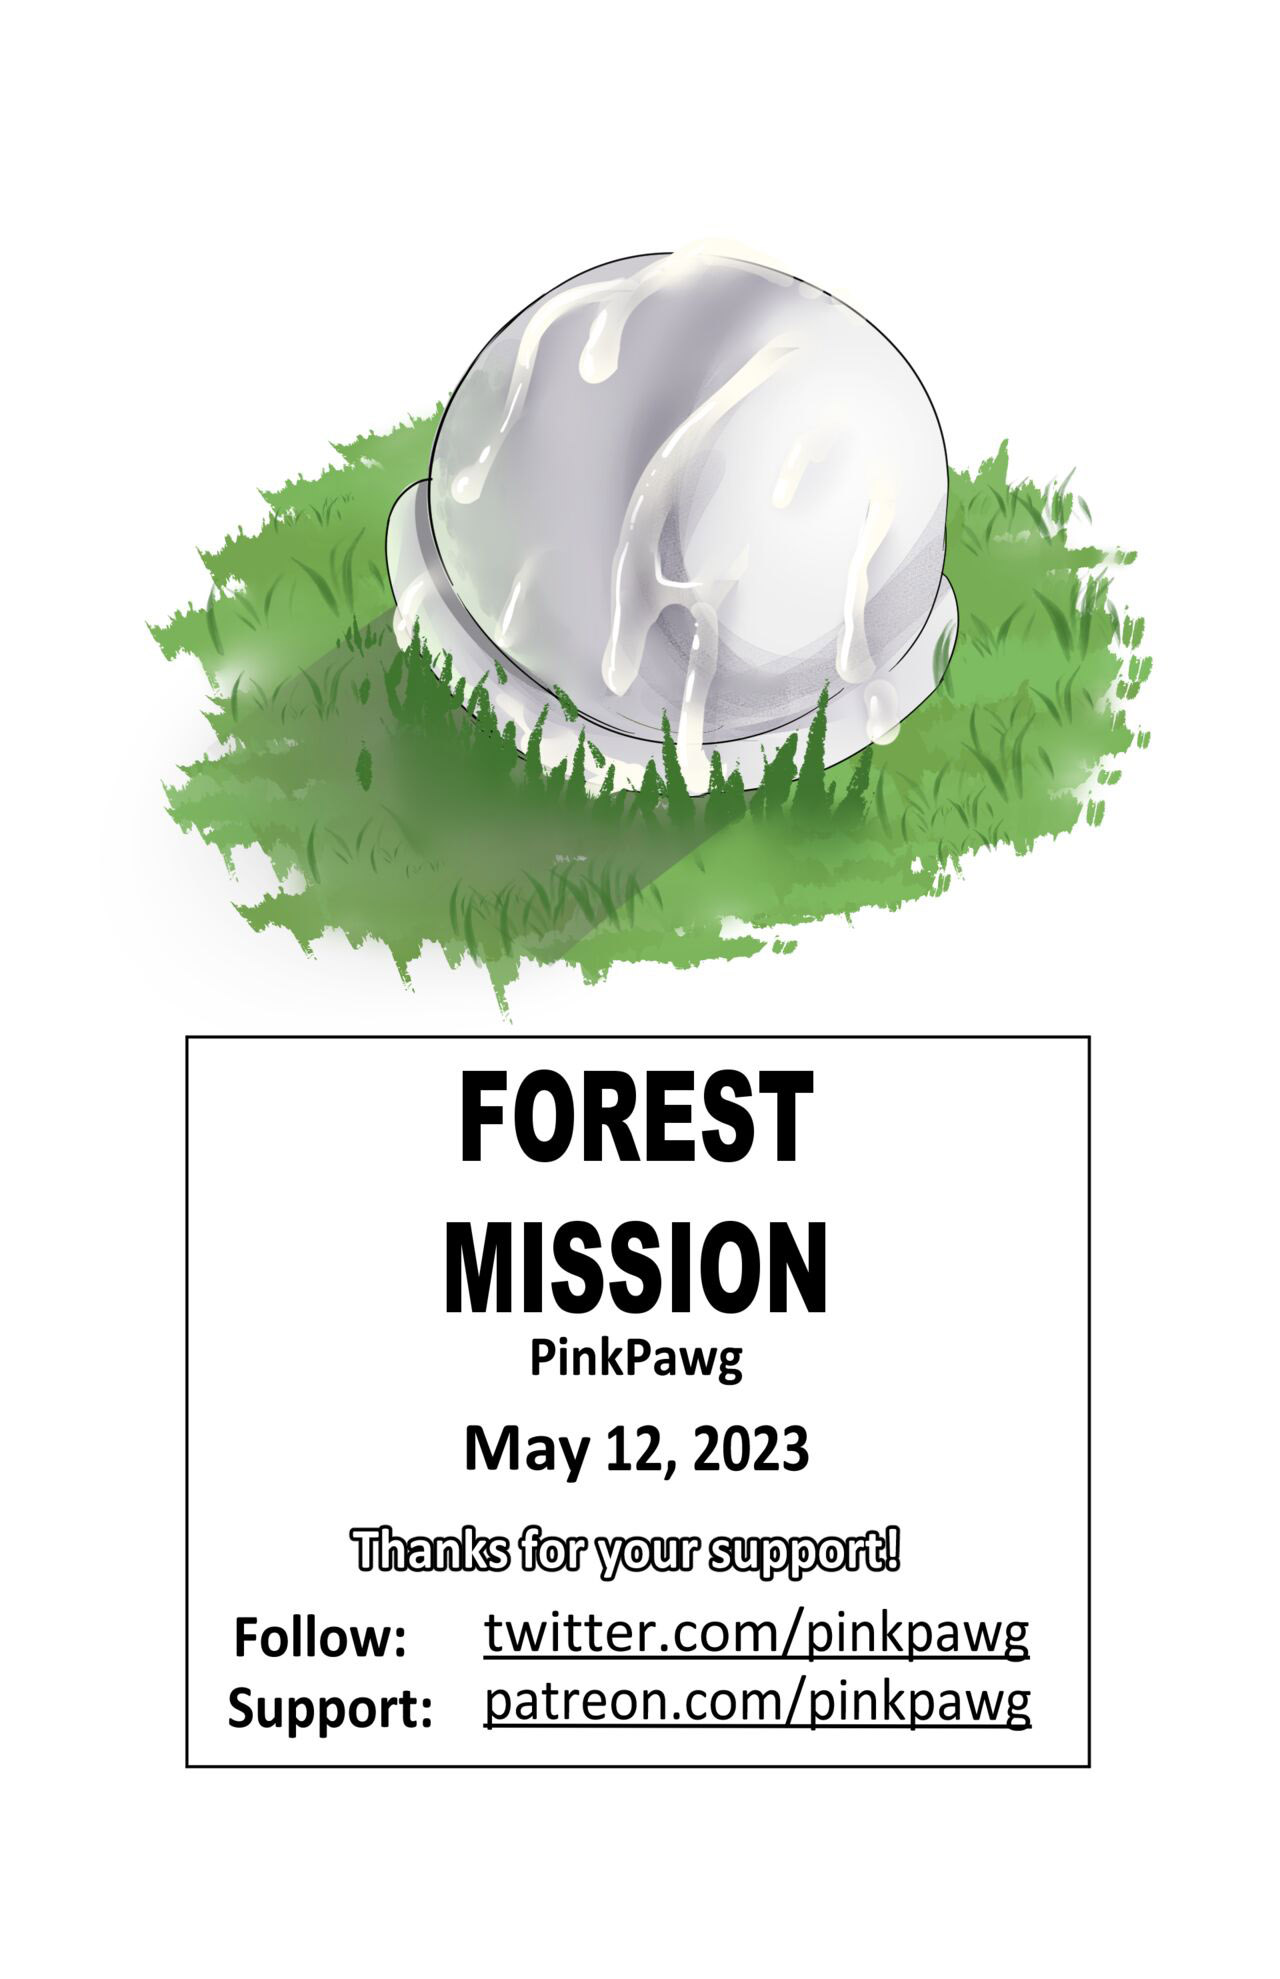 Forest mission by pinkpawg